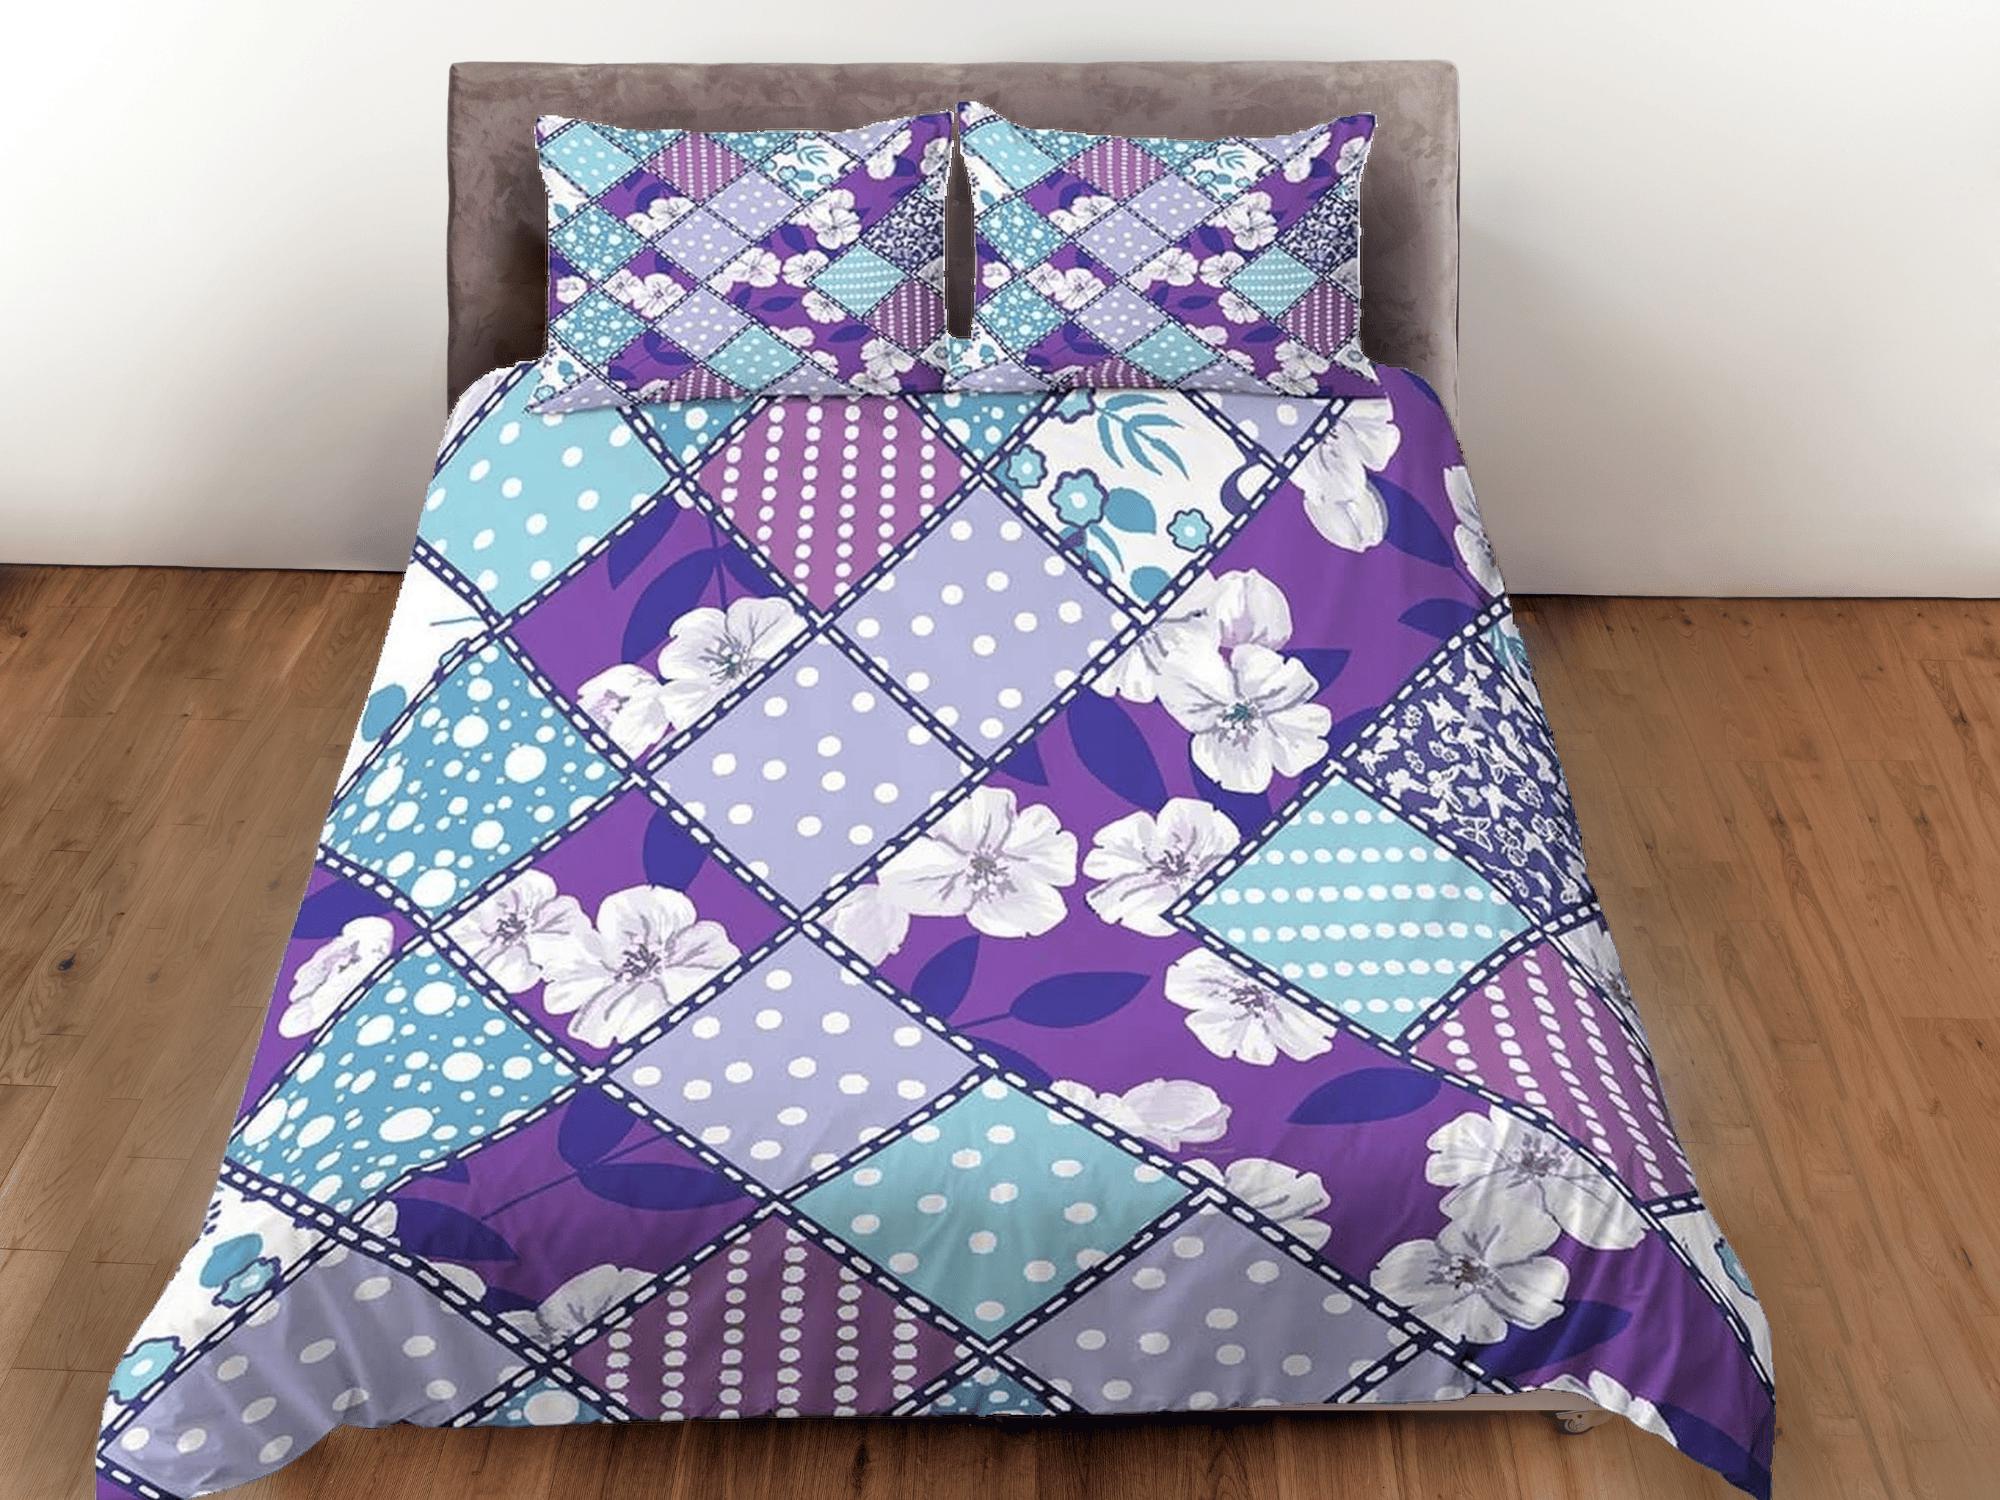 daintyduvet Purple floral patchwork quilt printed duvet cover set, aesthetic room decor bedding set full, king, queen size, boho bedspread shabby chic